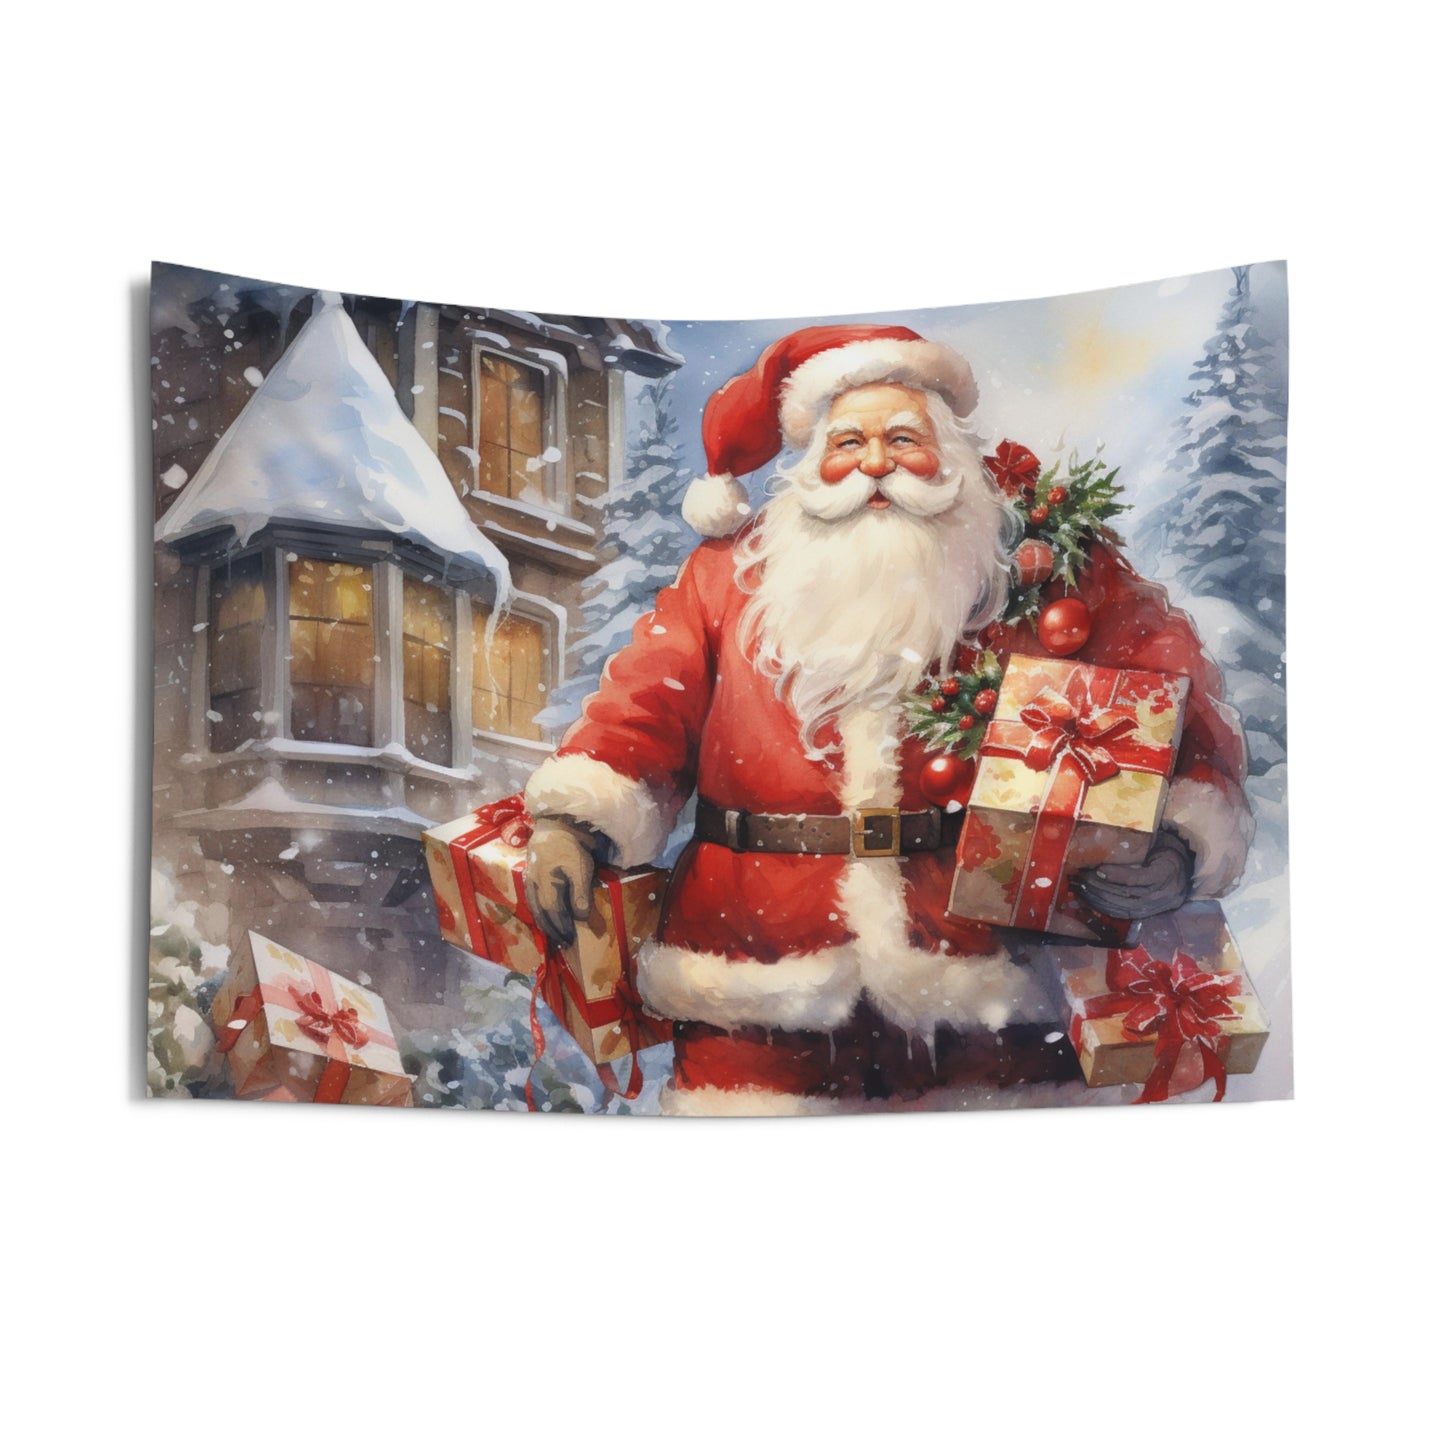 Santa Claus Christmas Tapestry, Vintage Snow Watercolor Winter Wall Art Hanging Cool Unique Landscape Aesthetic Large Small Decor Room Starcove Fashion